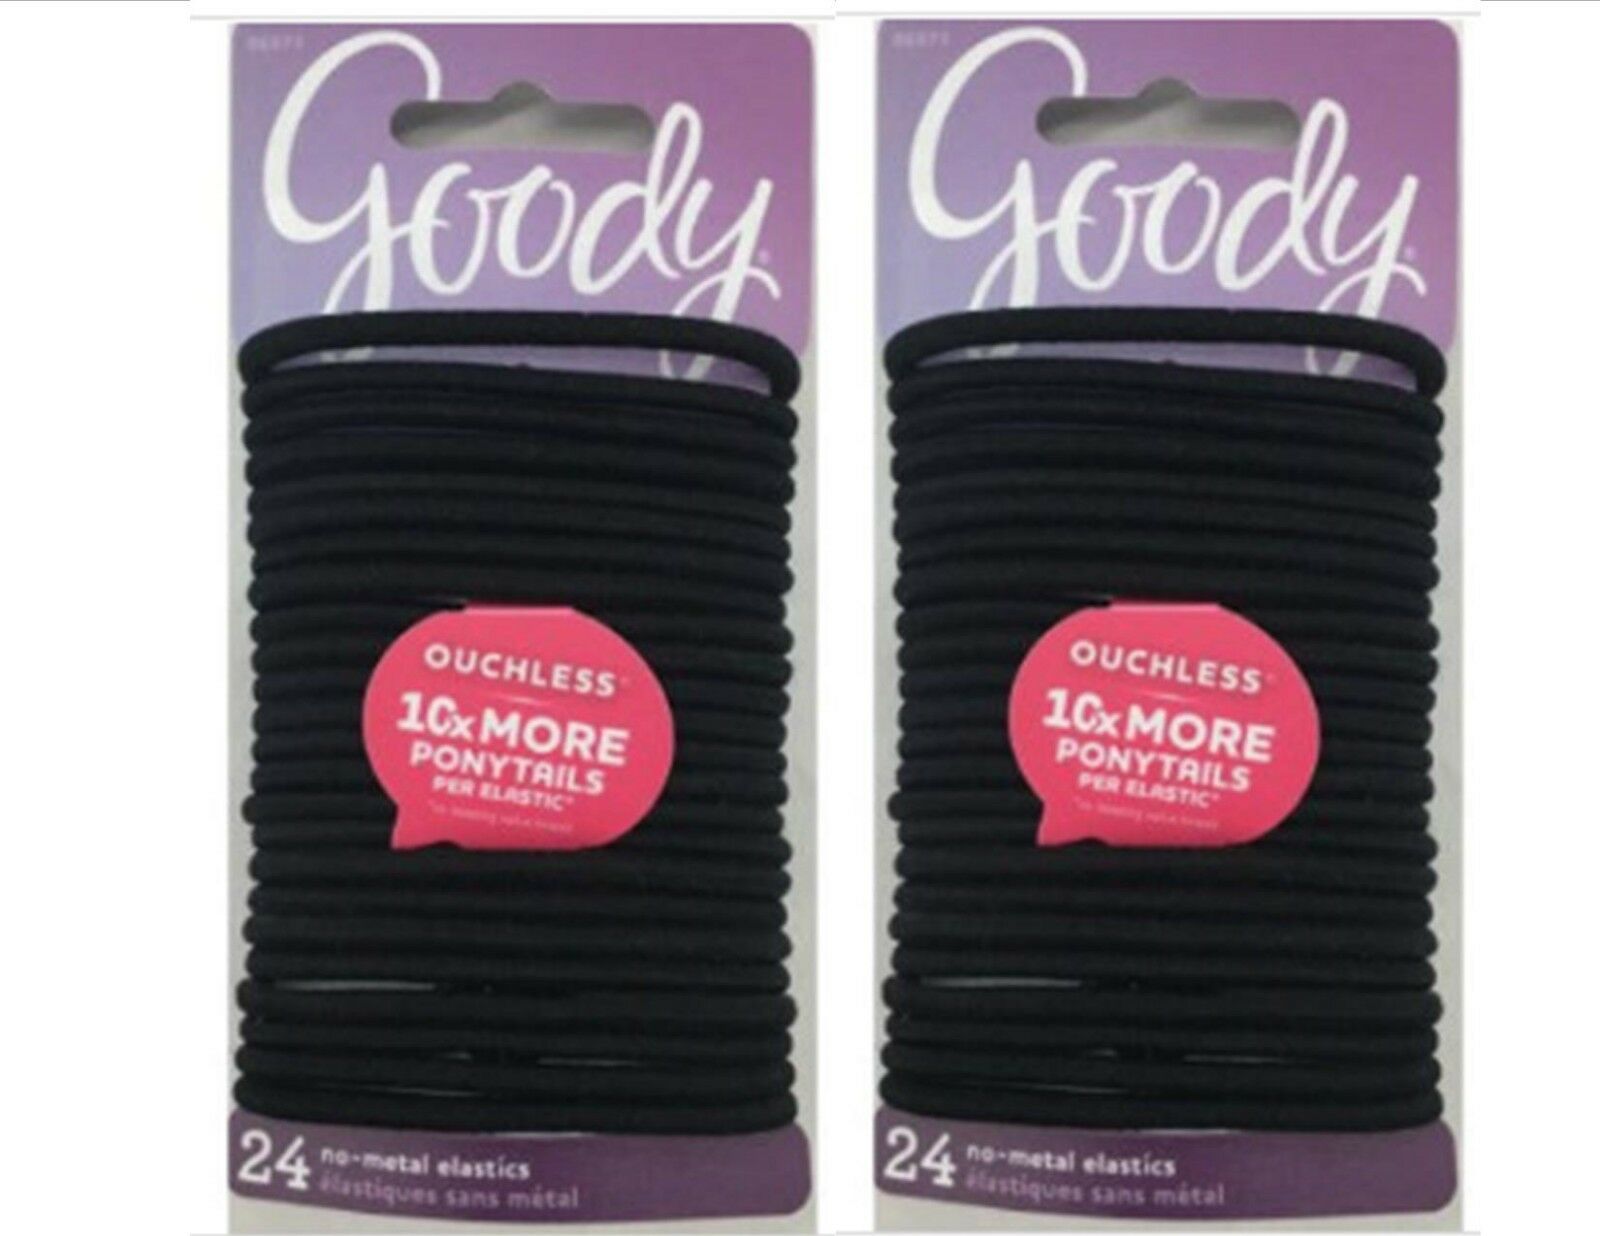 Goody Ouchless No Metal Hair Ties Elastics Pony Tail 48 Count Black